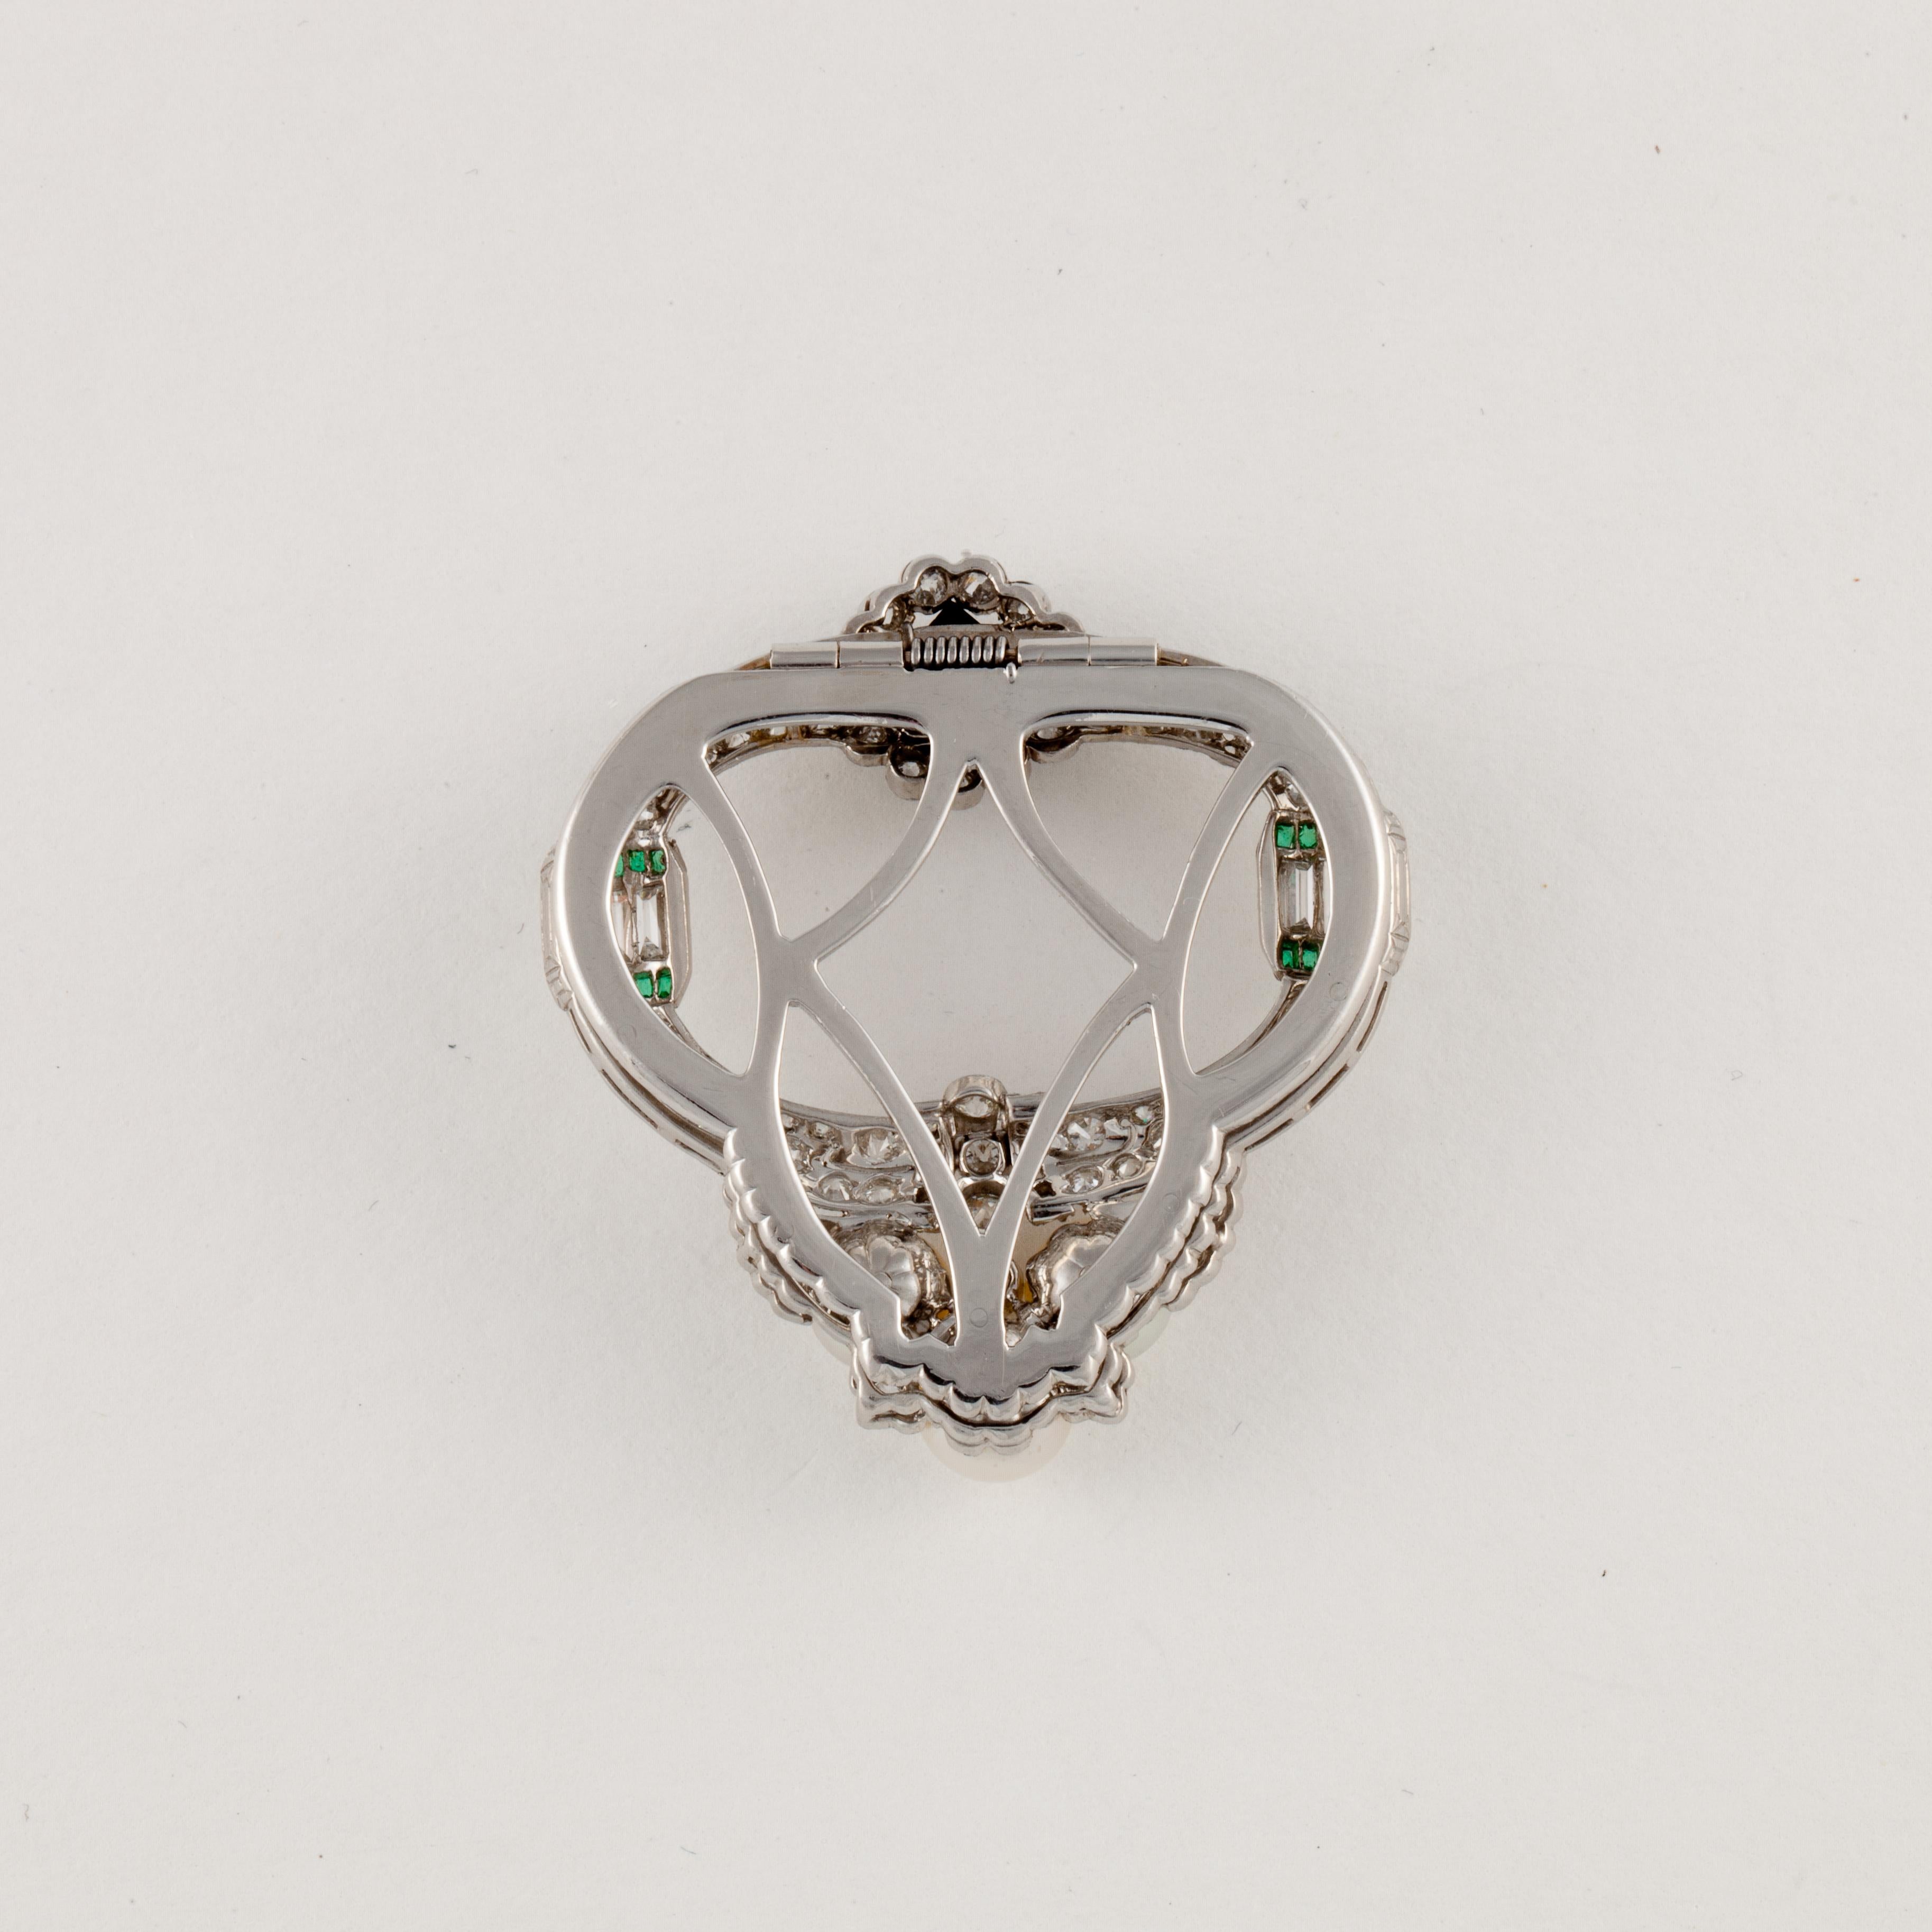 Platinum brooch featuring diamonds, onyx, cultured pearls and emeralds.  There are 3.35 carats of diamonds;  H-J color and VVS2-I1 clarity.  In addition, there are 0.22 carats of emeralds, the onyx measures 6.0mm and the three pearls are 6.5-7.0mm. 